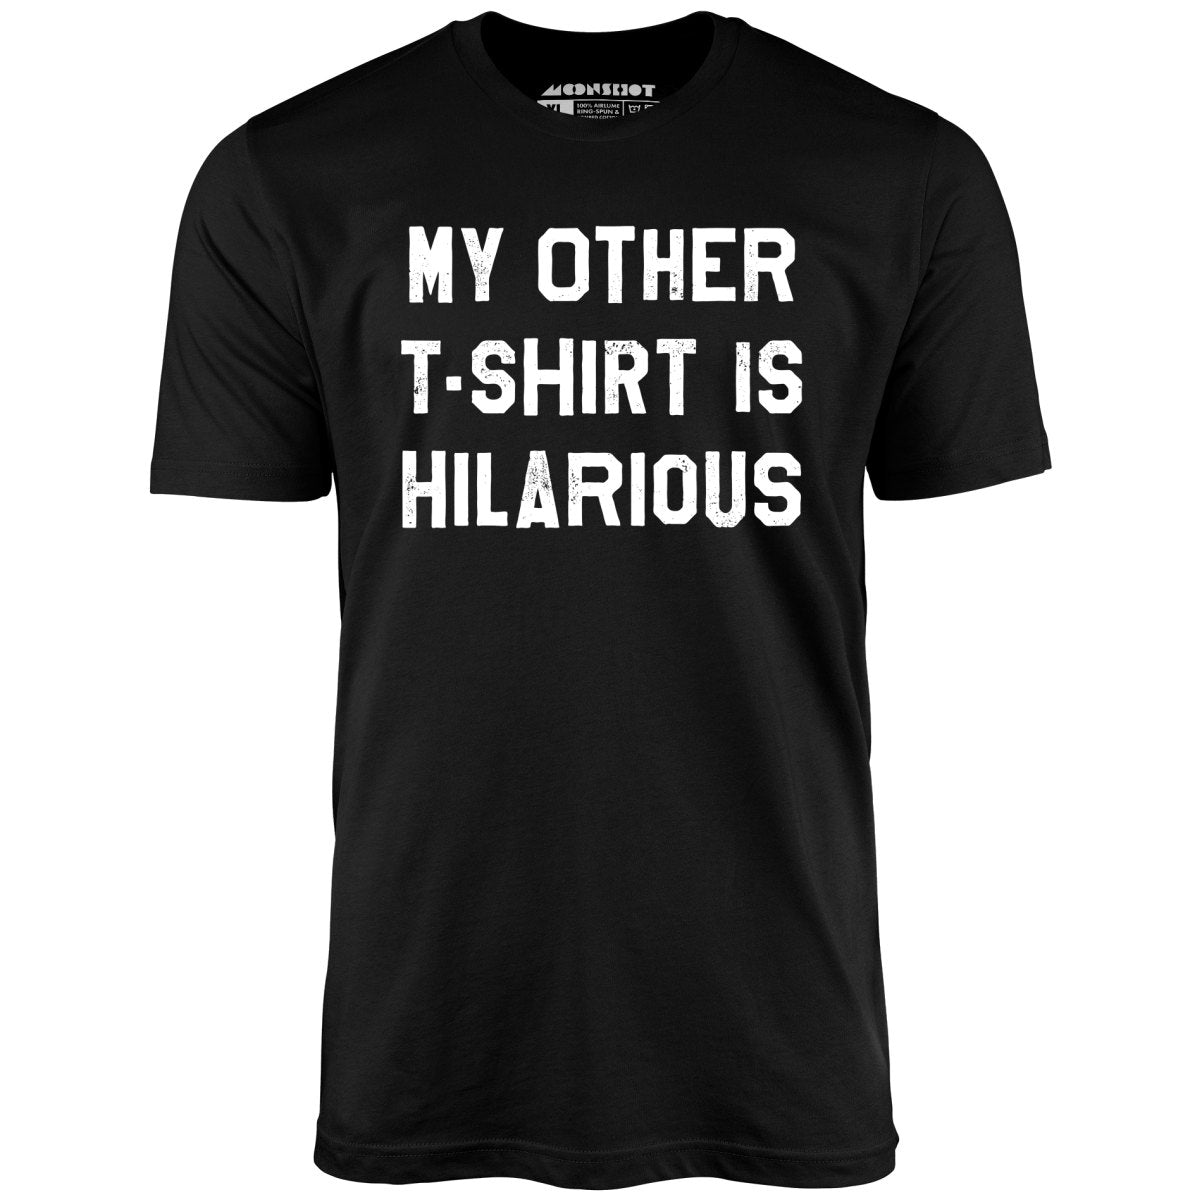 My Other T-Shirt is Hilarious - Unisex T-Shirt